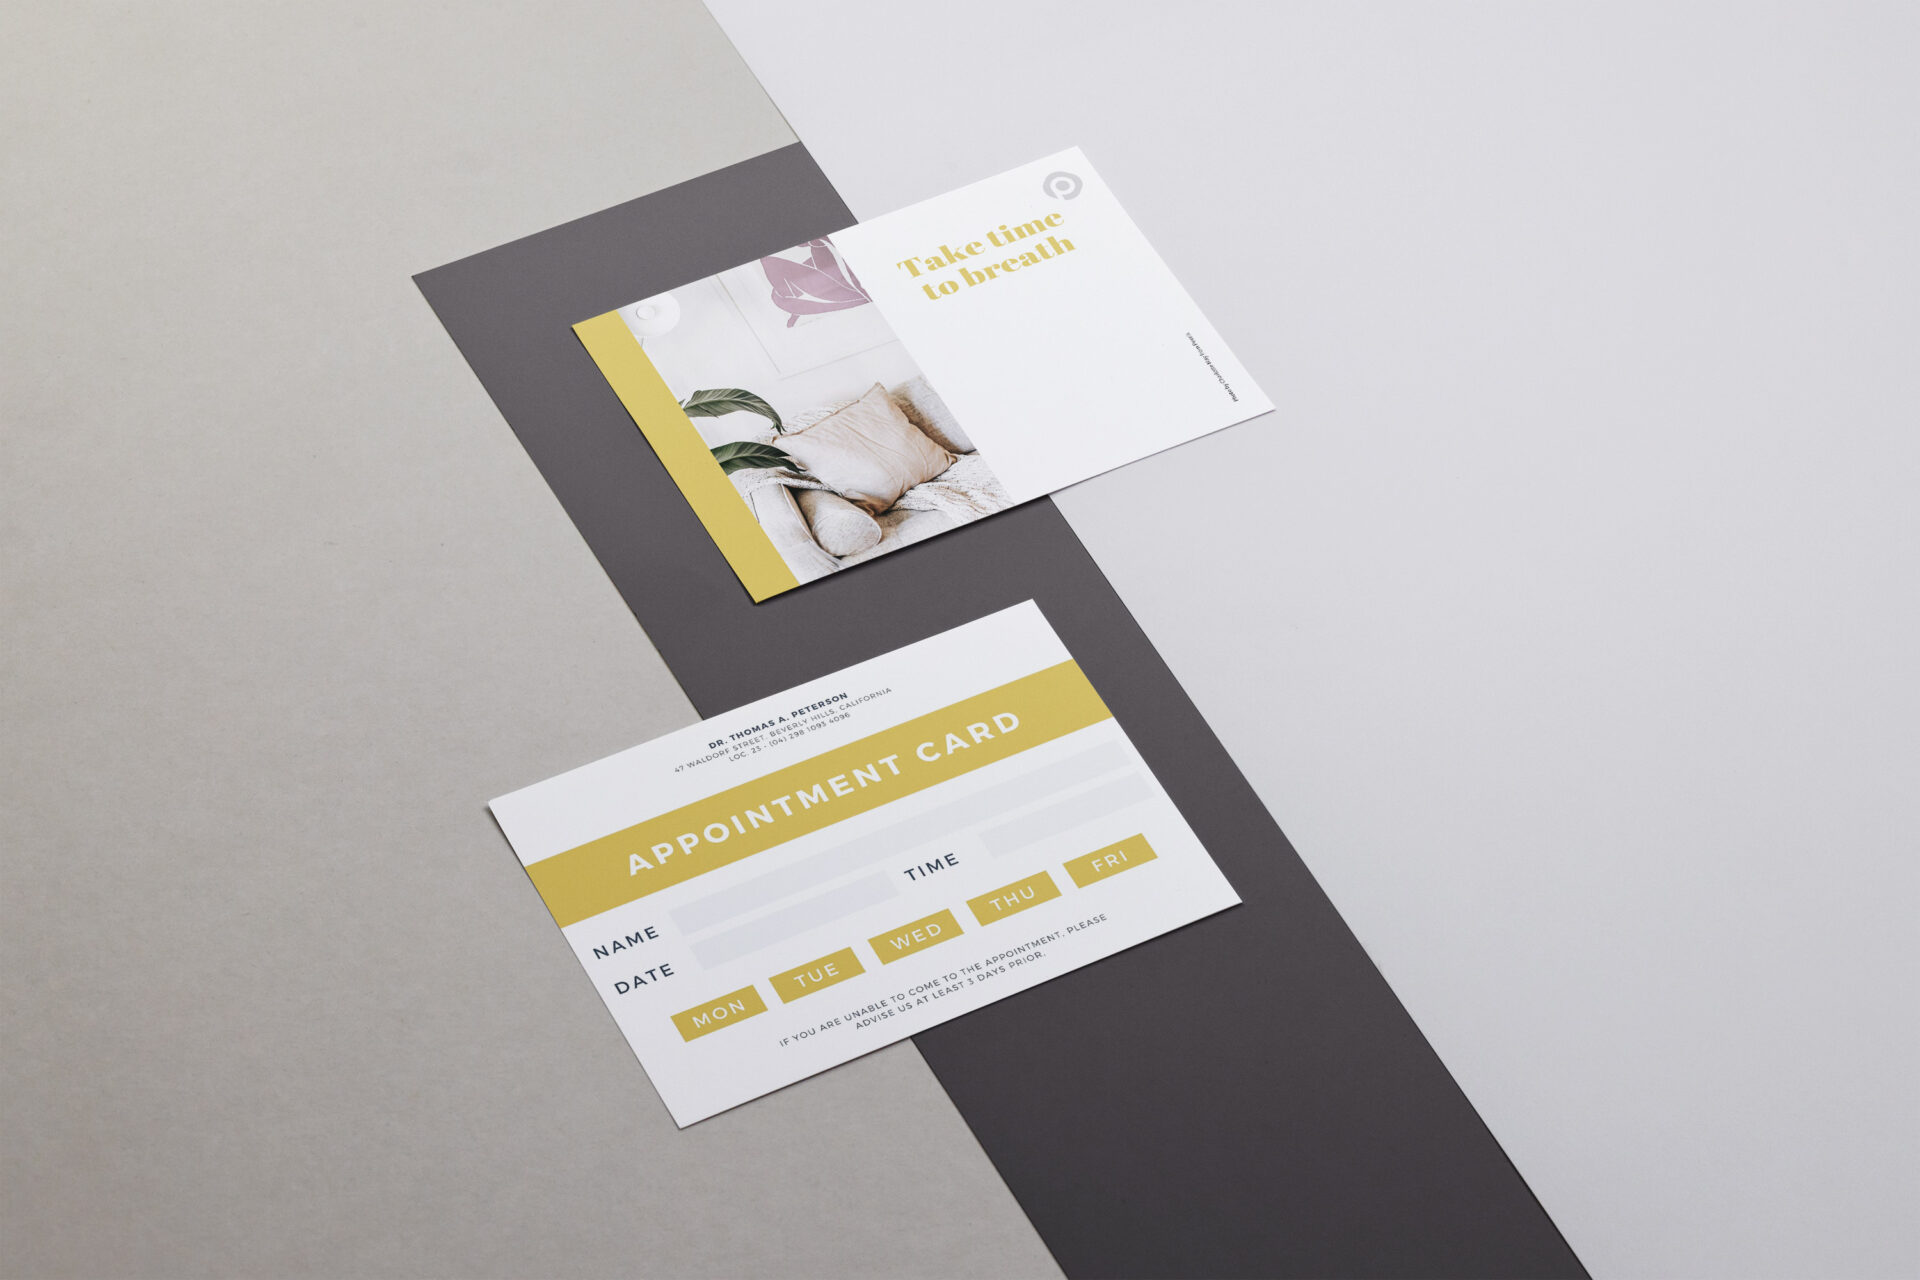 Appointment cards in Berlin - Print with Pagerr